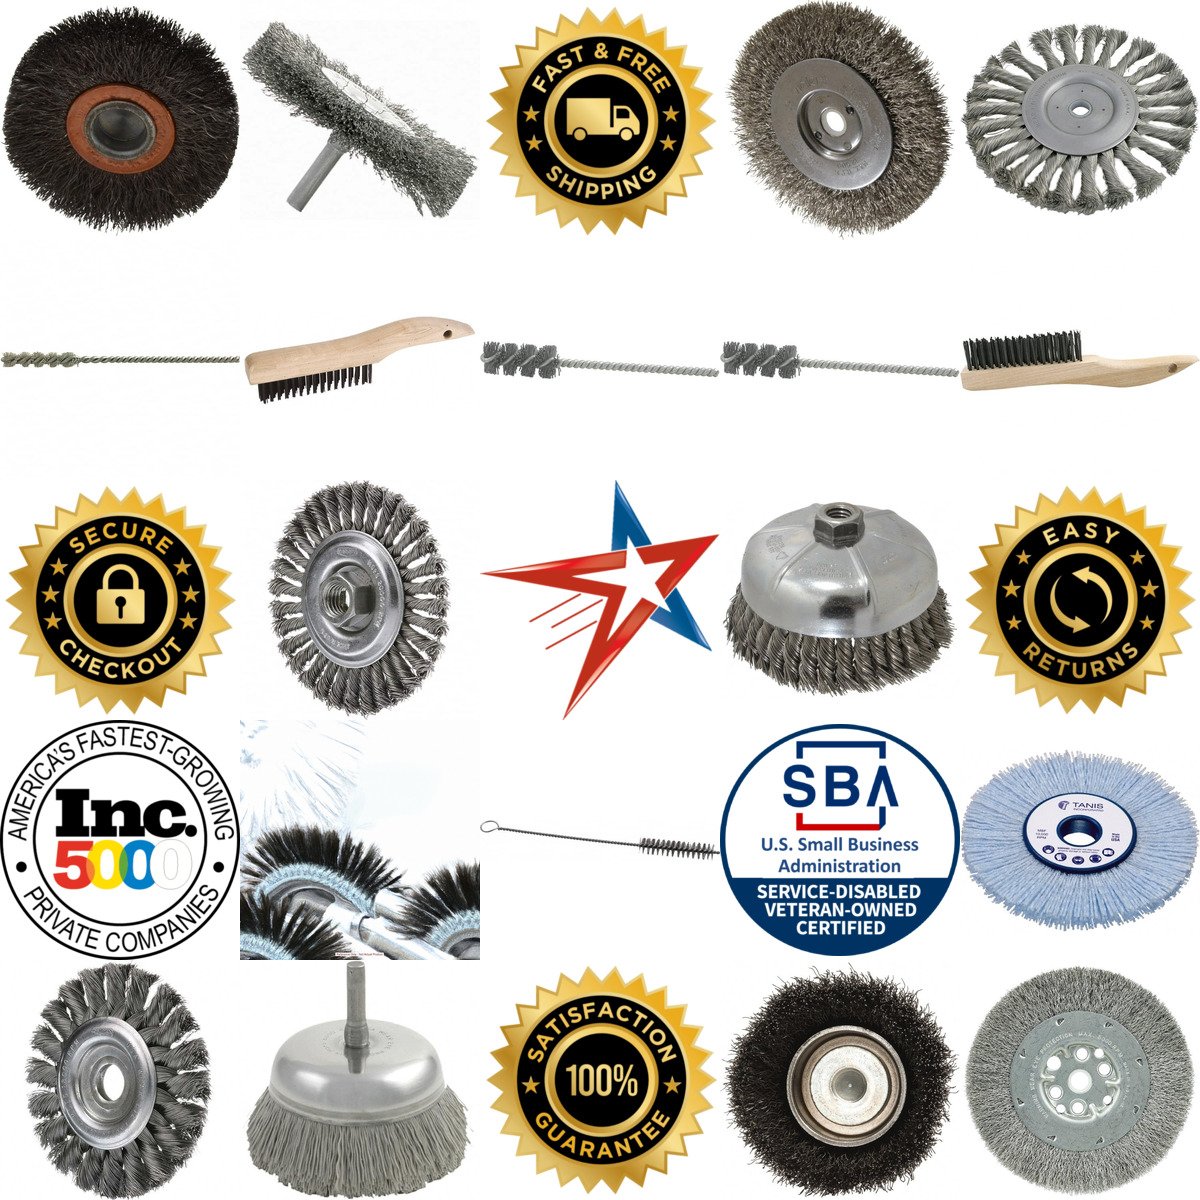 A selection of Abrasive Brushes products on GoVets